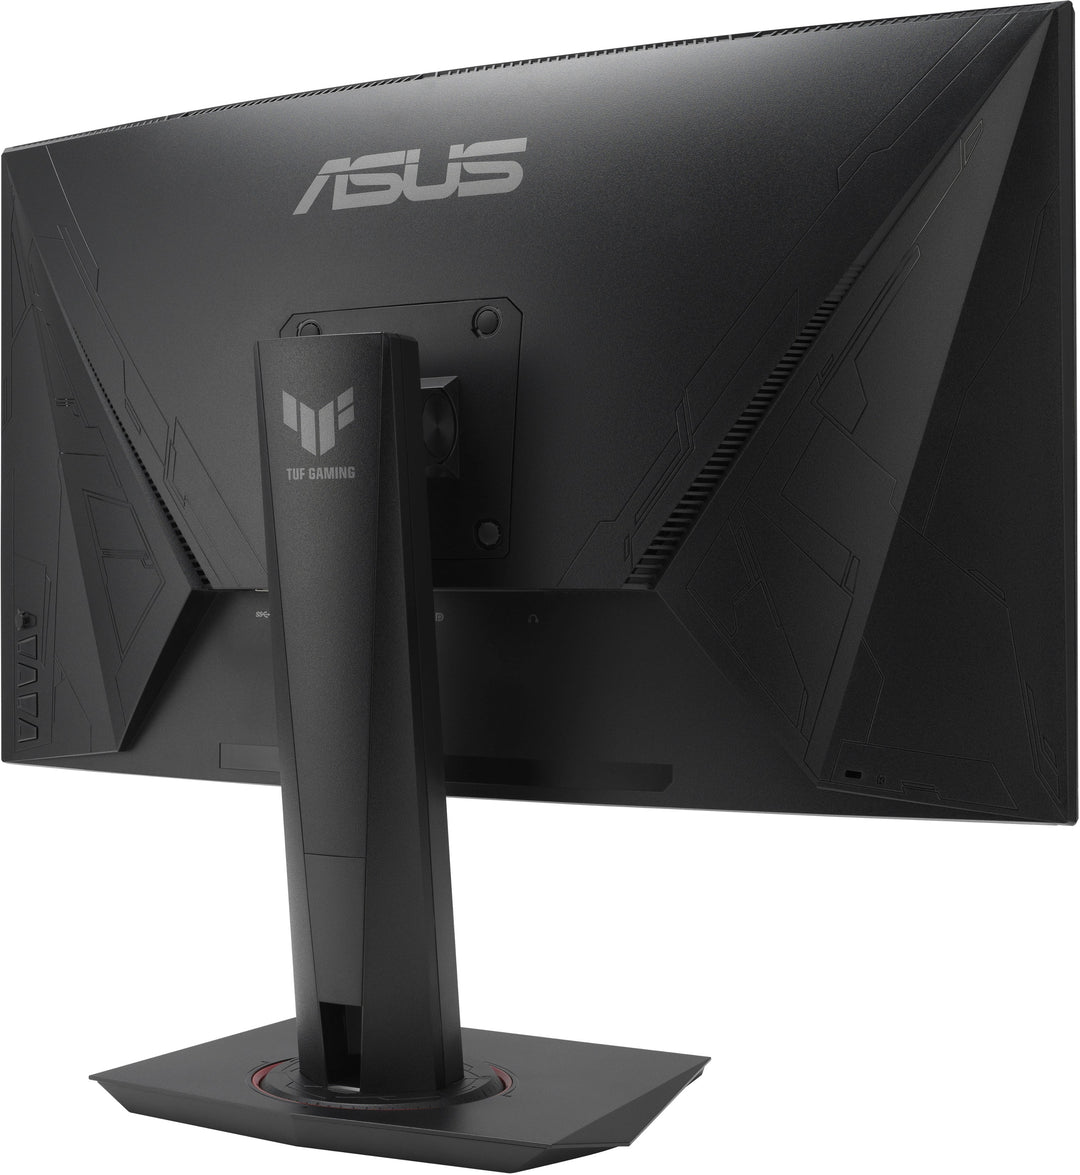 ASUS - TUF 27" IPS LED FHD G-SYNC Gaming Monitor with HDR (DisplayPort, HDMI)_4